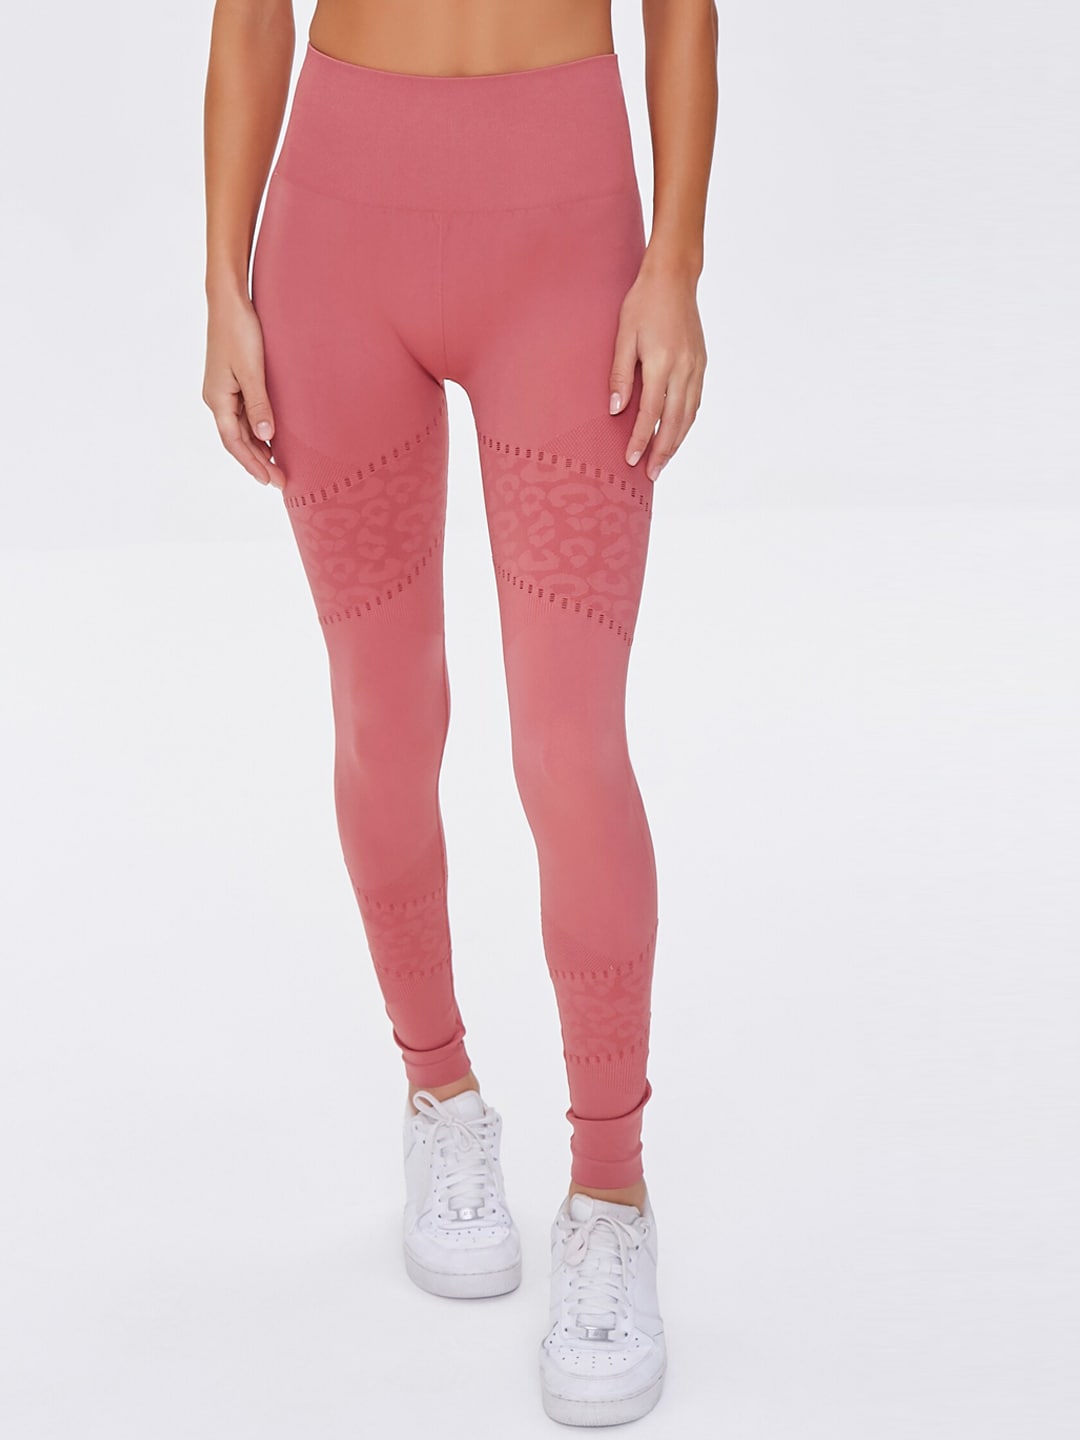 FOREVER 21 Women Pink Animal Print Sports Tights Price in India